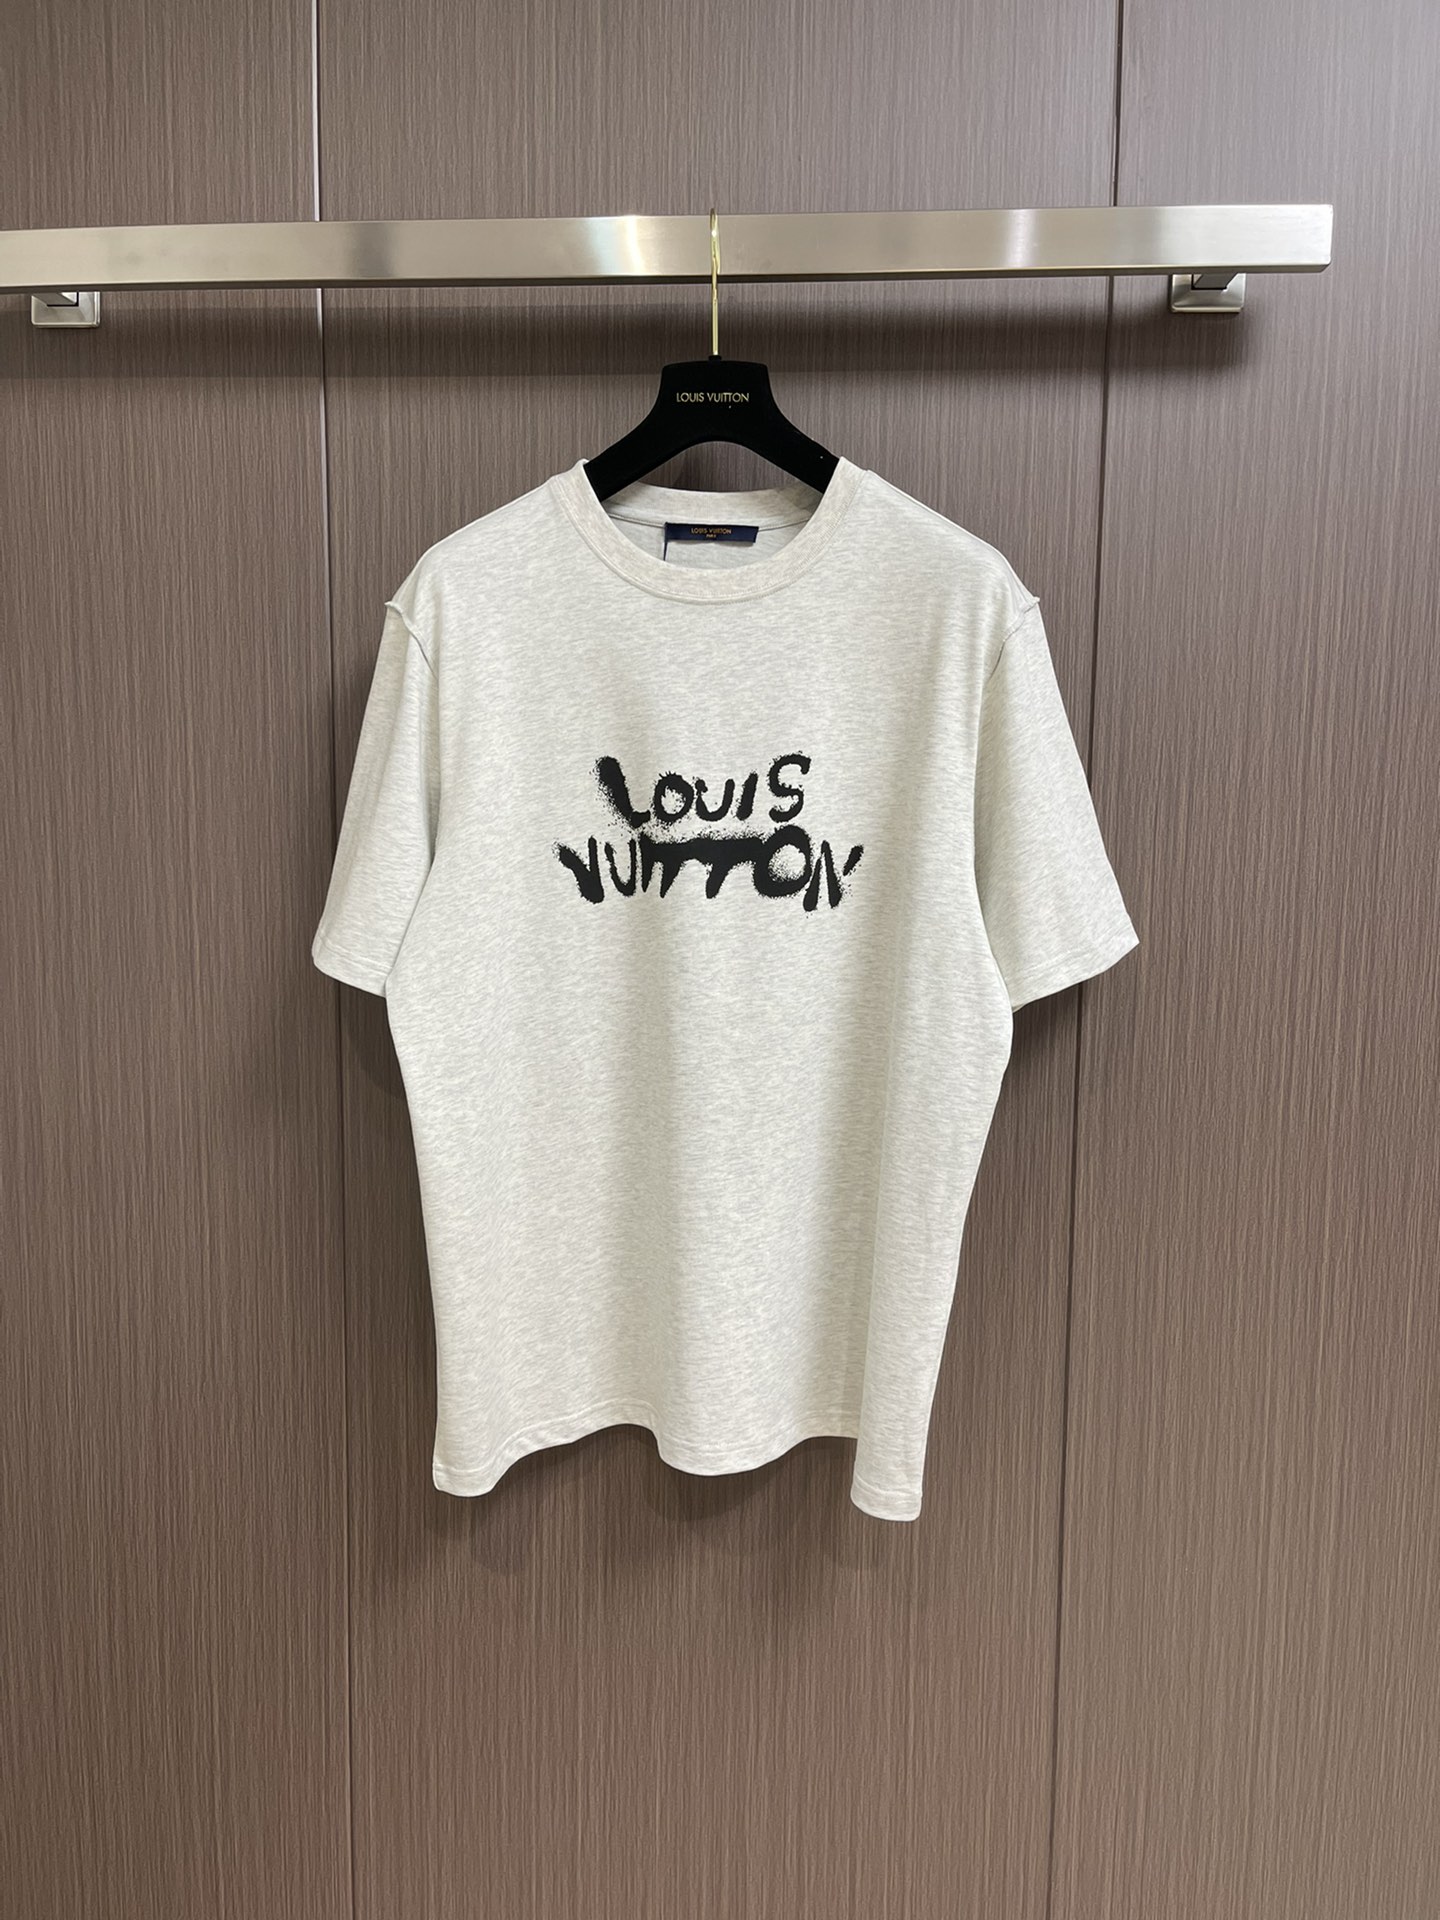 Buy High Quality Cheap Hot Replica
 Louis Vuitton Clothing T-Shirt Black Grey White Printing Cotton Knitted Knitting Summer Collection Short Sleeve